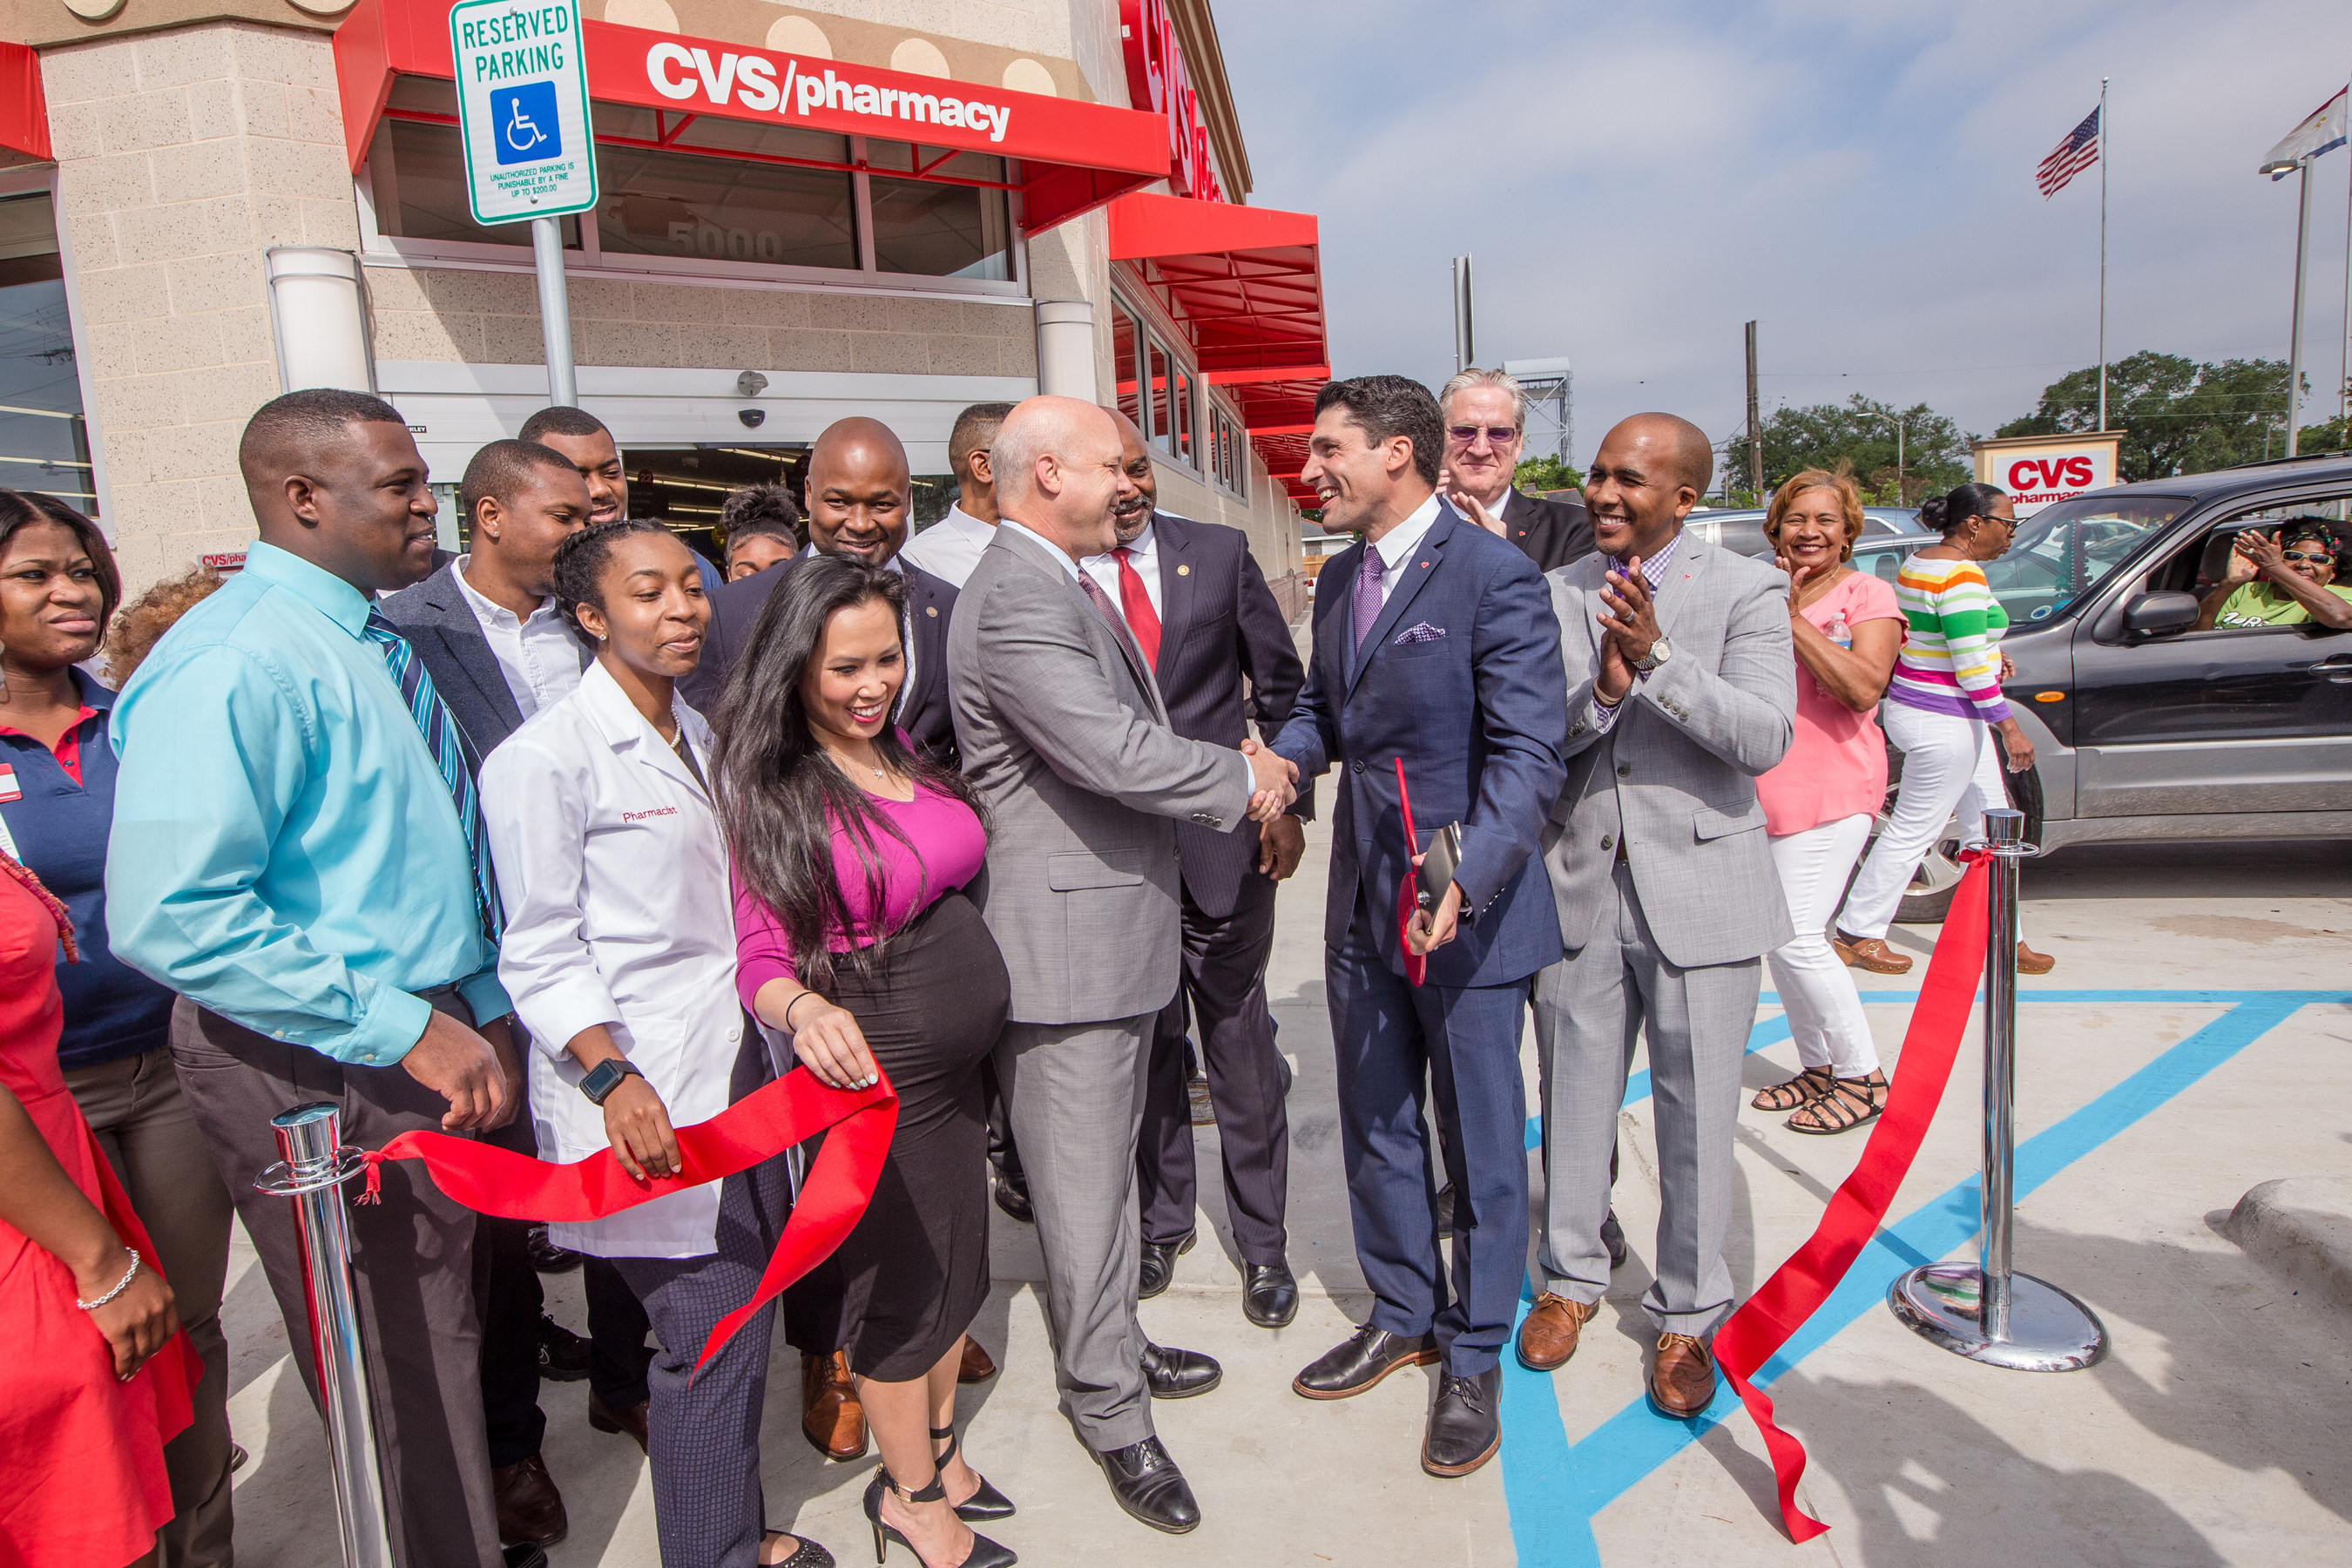 CVS Pharmacy Becomes First Major Retailer to Open in New Orleans Lower Ninth Ward Since Hurricane Katrina; New Orleans Mayor Mitch Landrieu and CVS Pharmacy celebrate grand opening with ribbon cutting ceremony